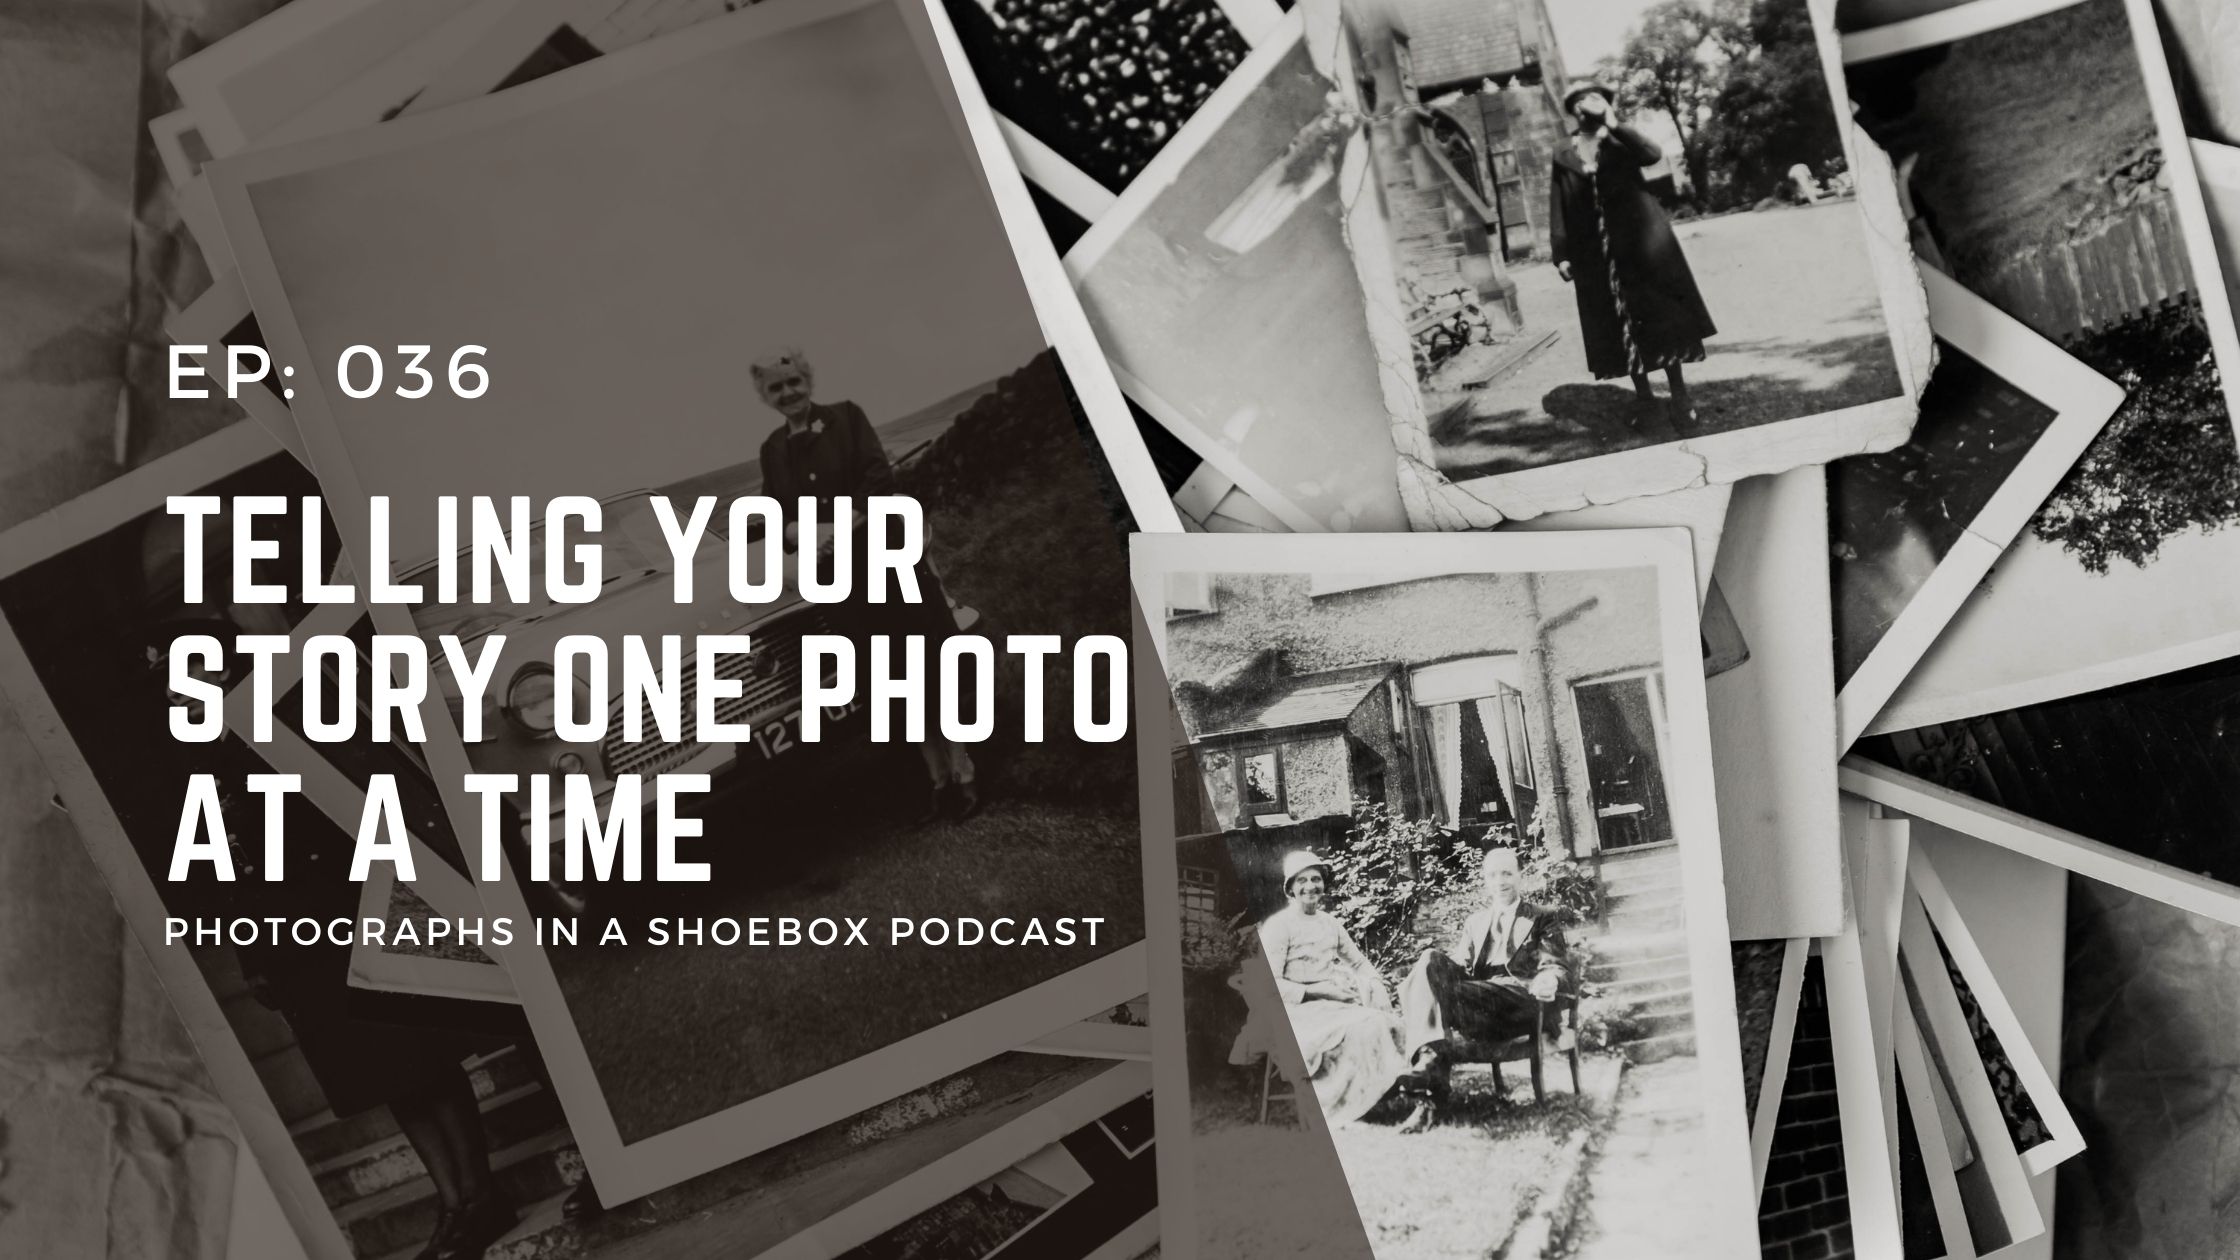 podcast episode cover image for 036 telling your story one photo at a time